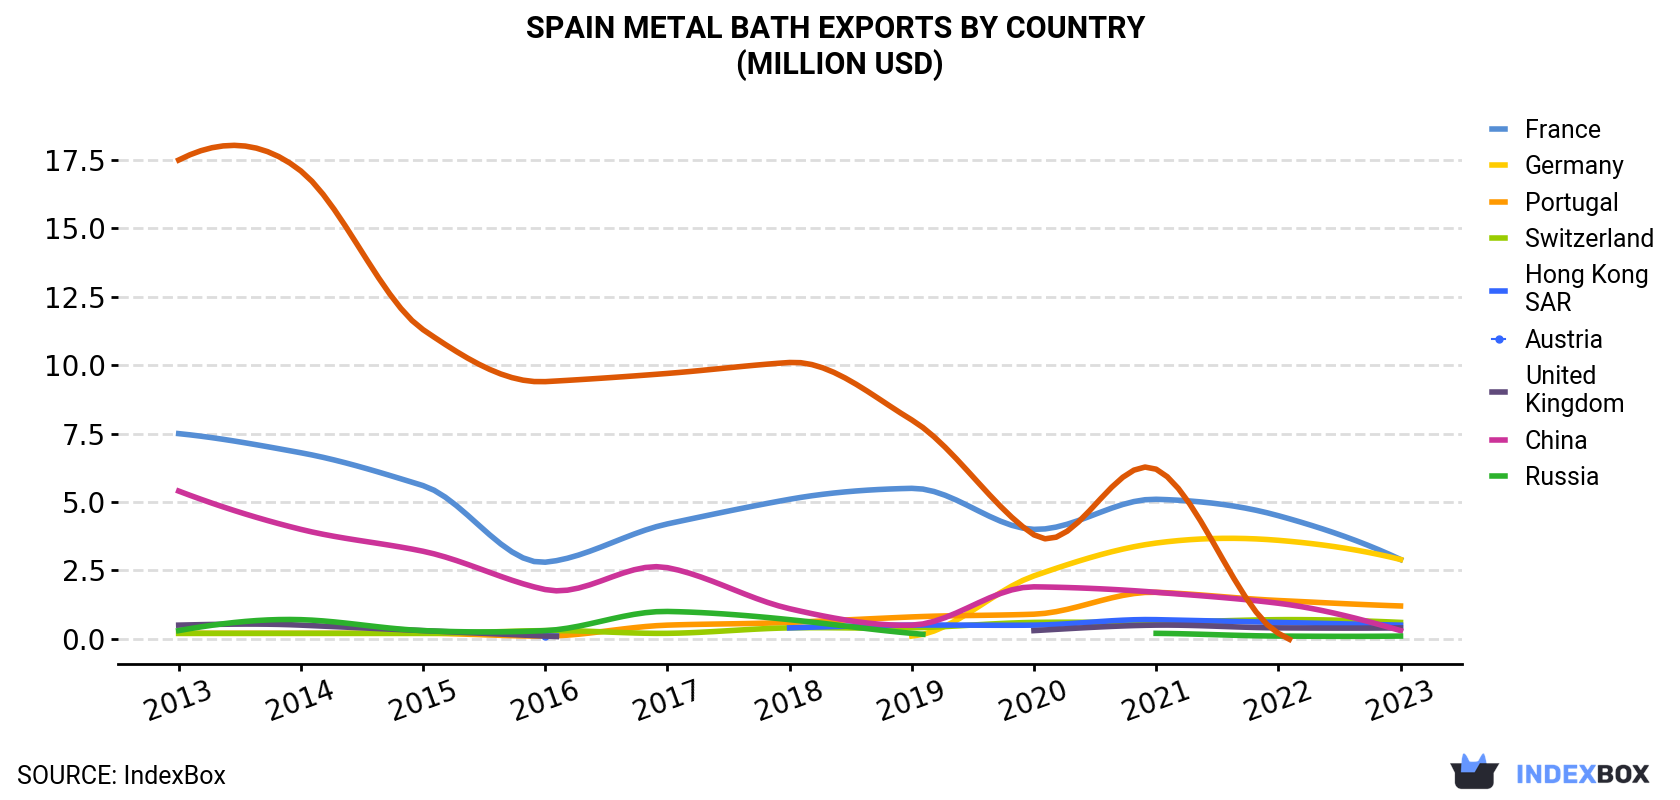 Spain Metal Bath Exports By Country (Million USD)